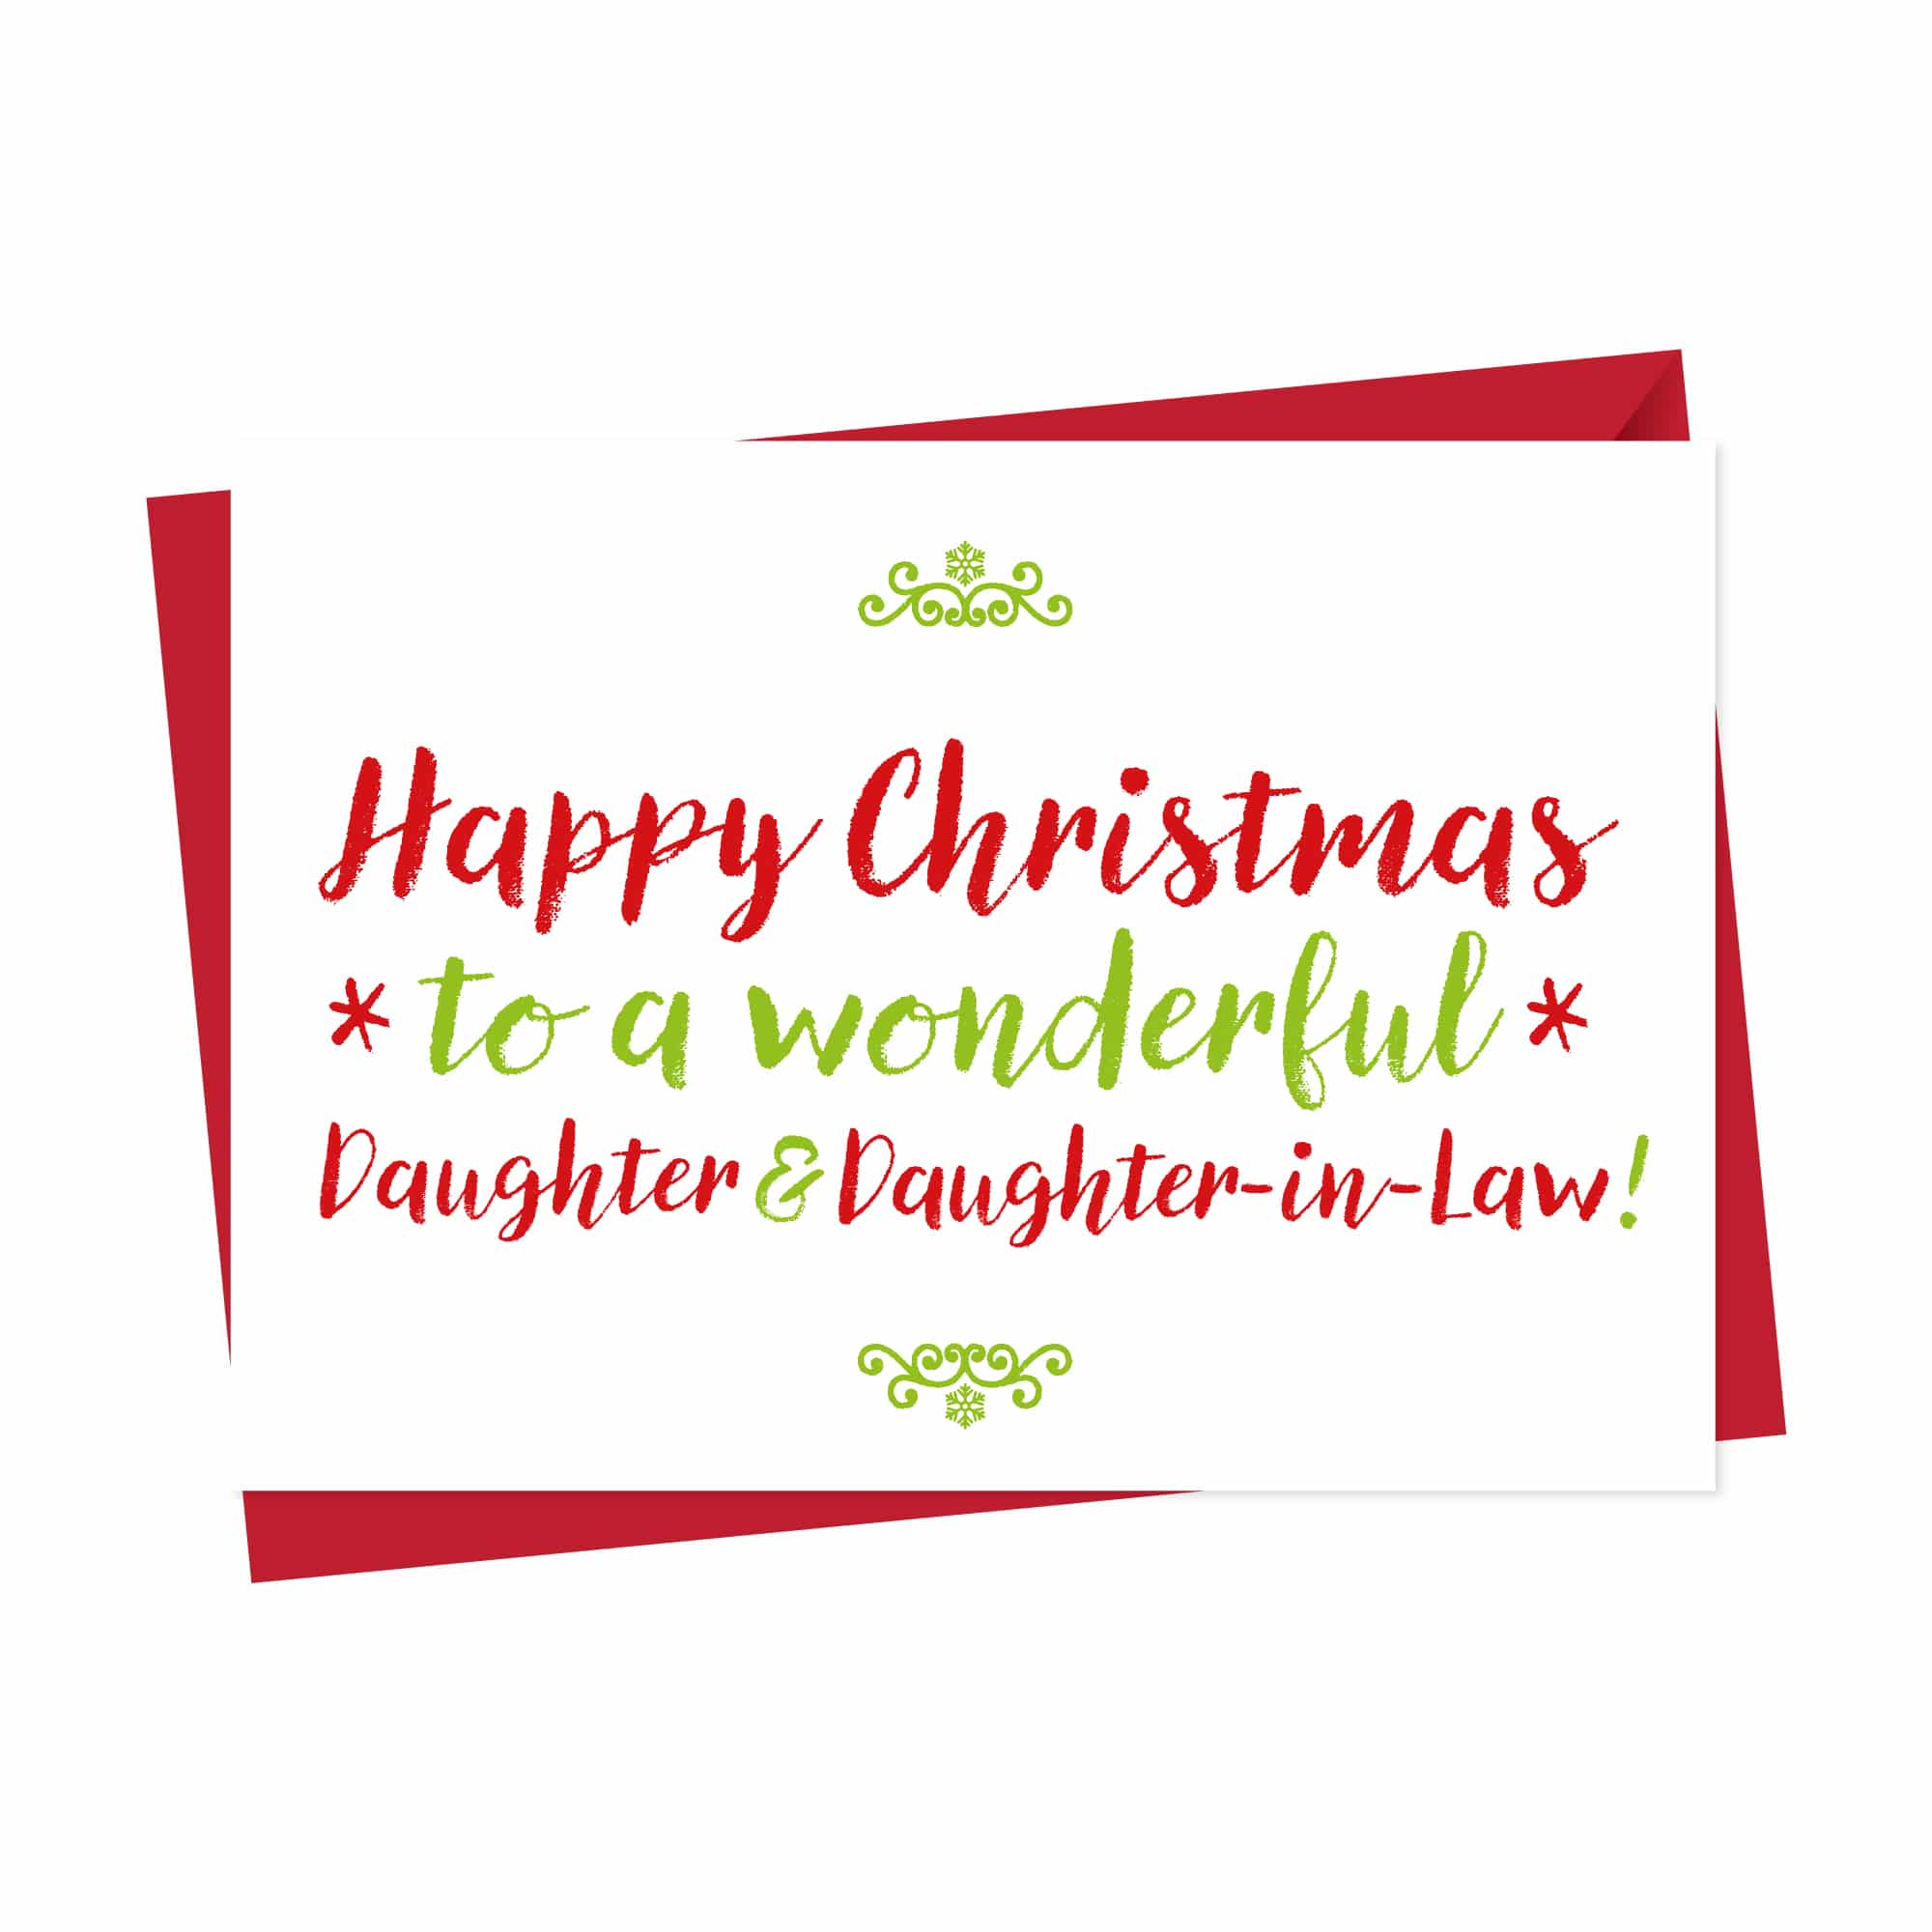 Christmas Card For Wonderful Daughter and Daughter in Law